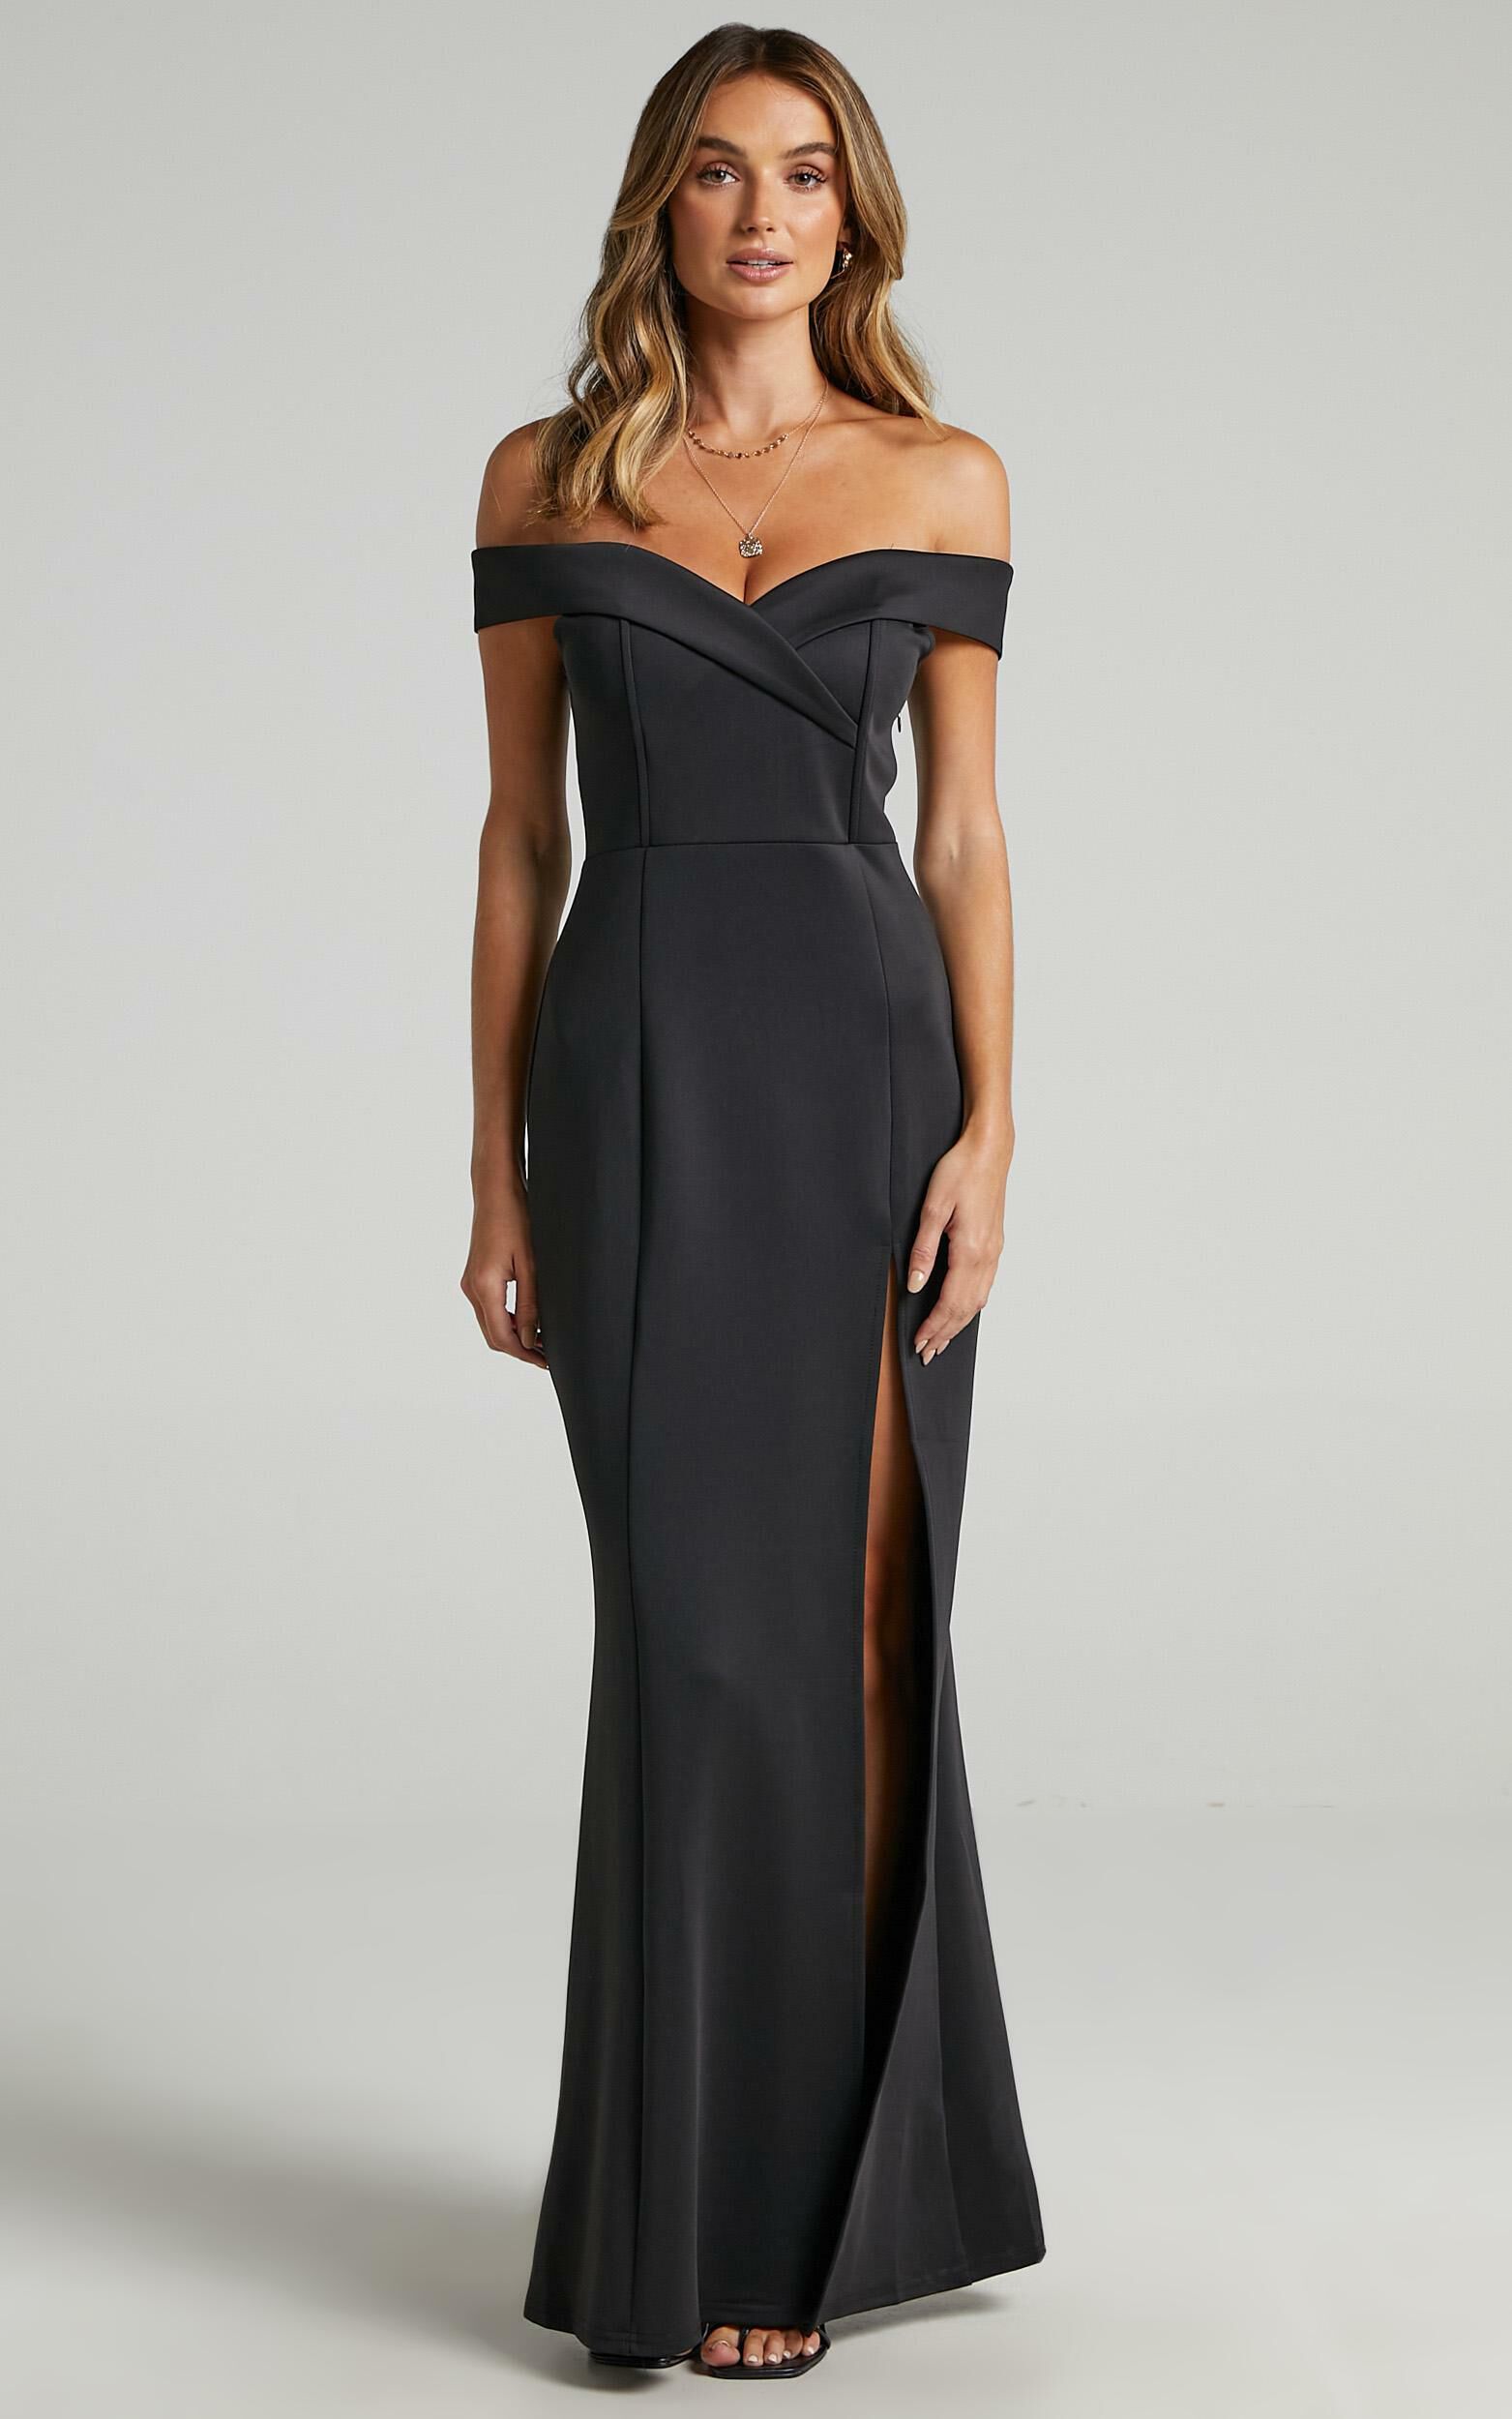 One For The Money Dress in Black - 06, BLK1